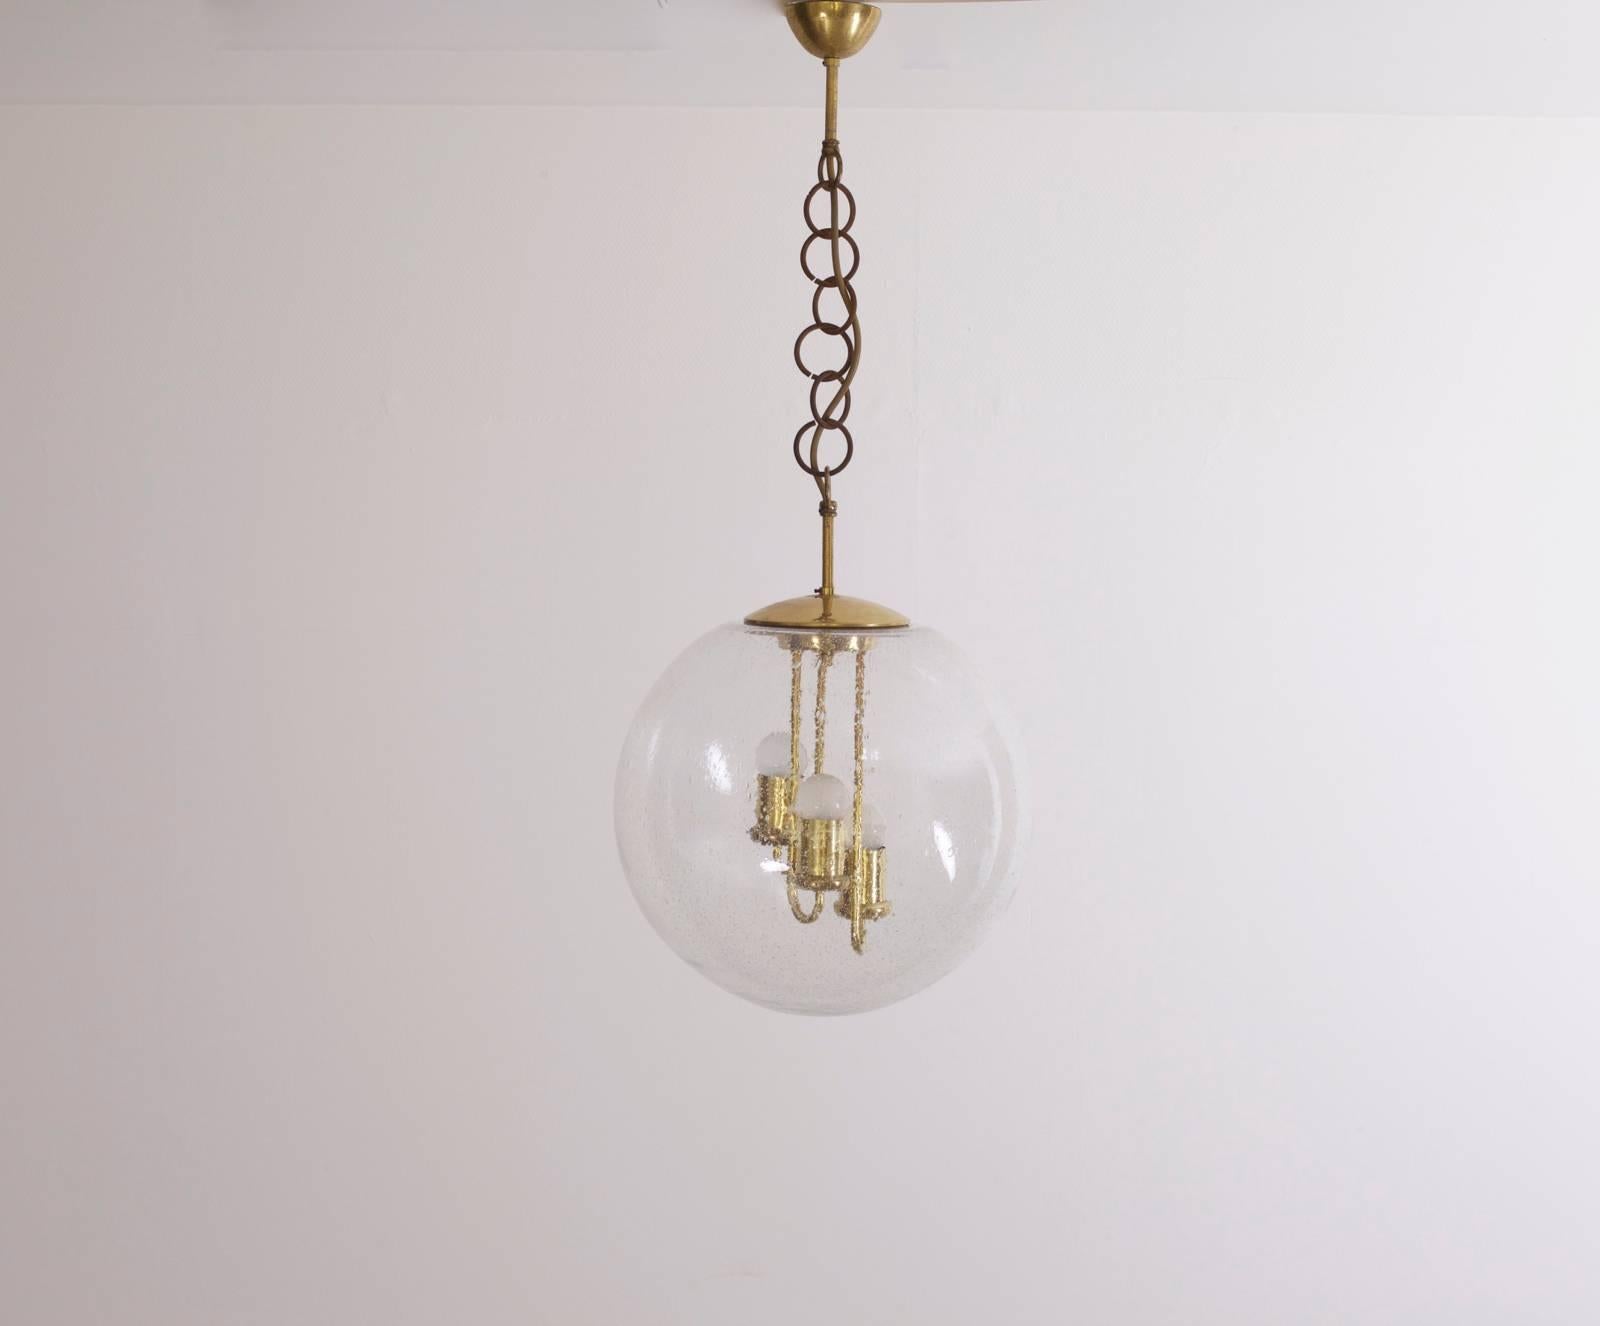 Rare huge Doria pendant lamp with beautiful brass details inside the bubble glass.
To be on the the safe side, the lamp should be checked locally by a specialist concerning local requirements.